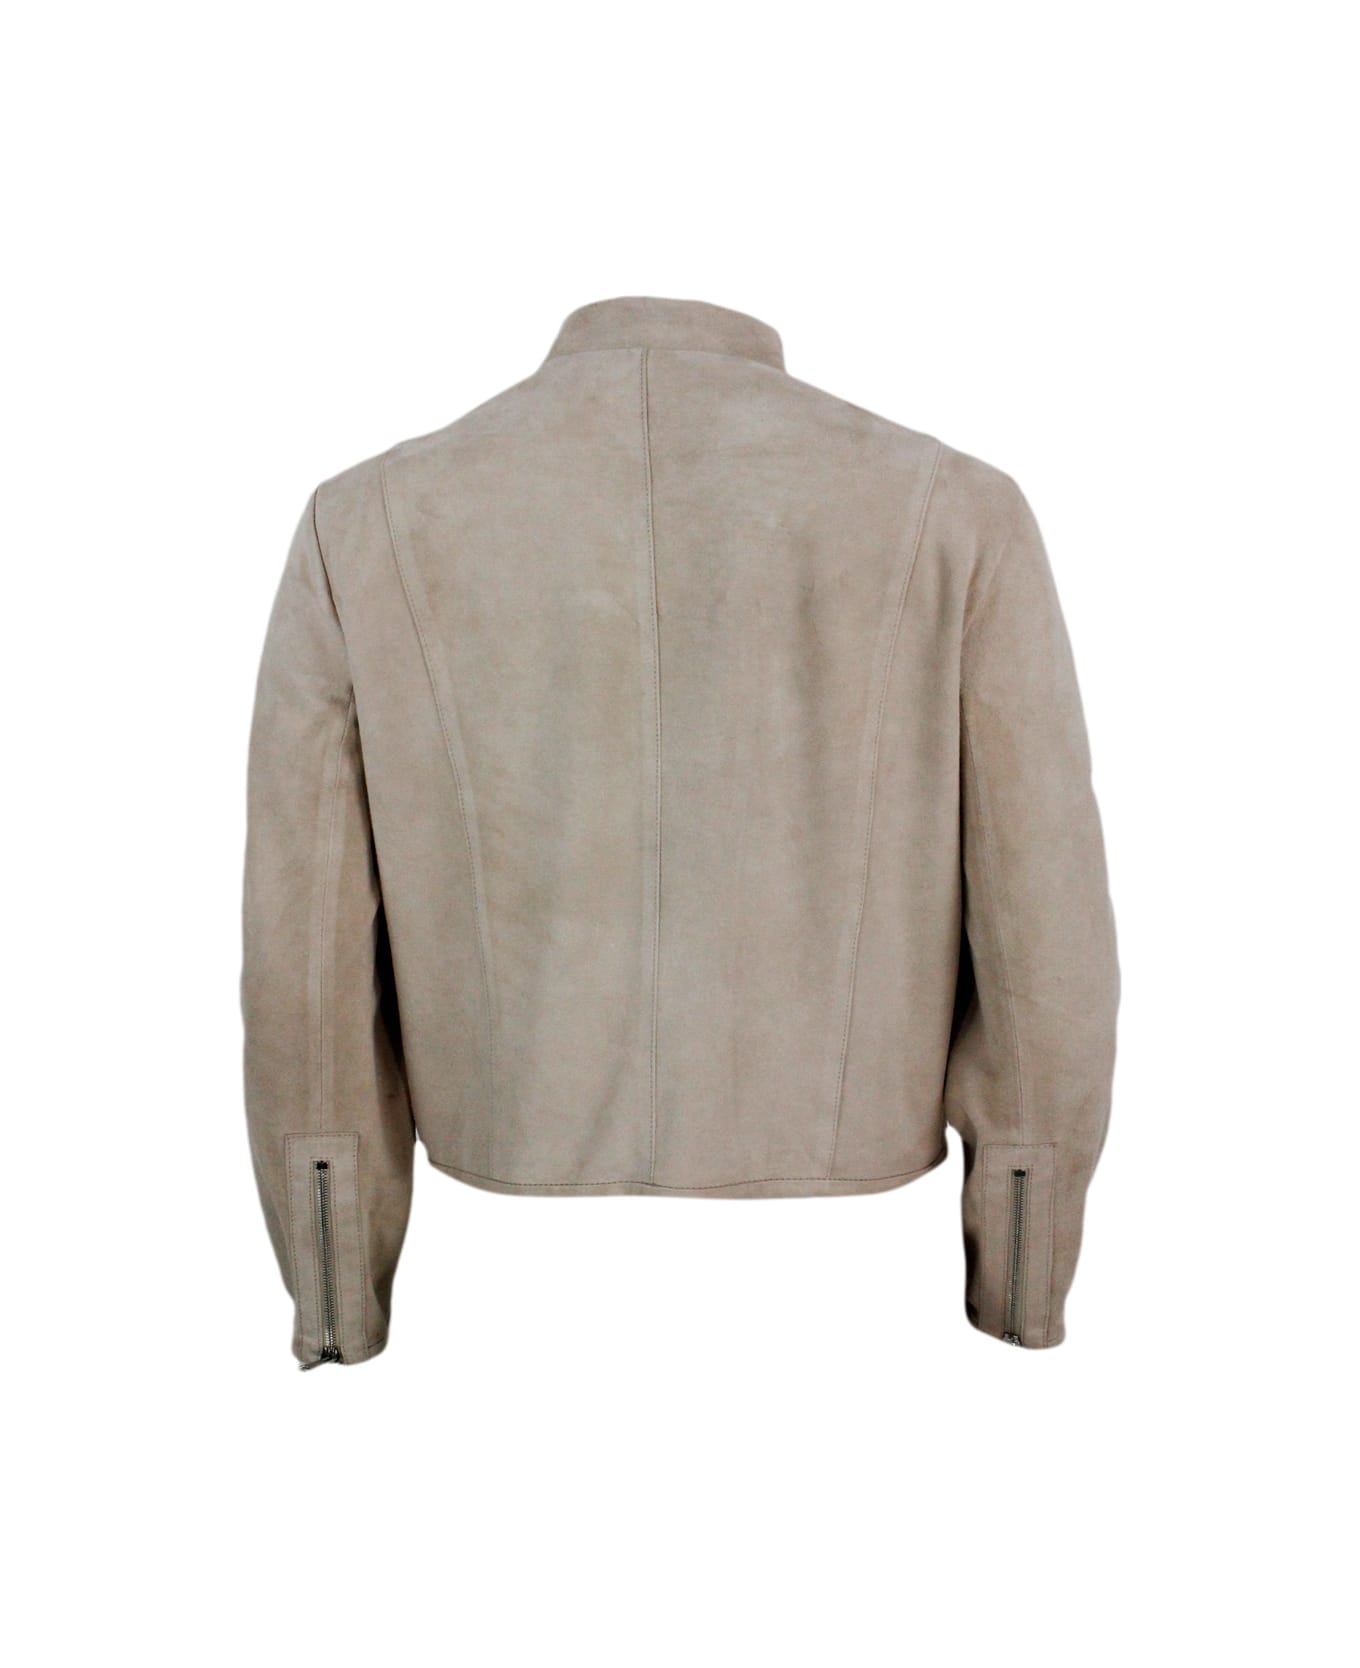 Antonelli Biker Jacket Made Of Soft Suede. Side Zip Closure And Pockets On The Front - Beige